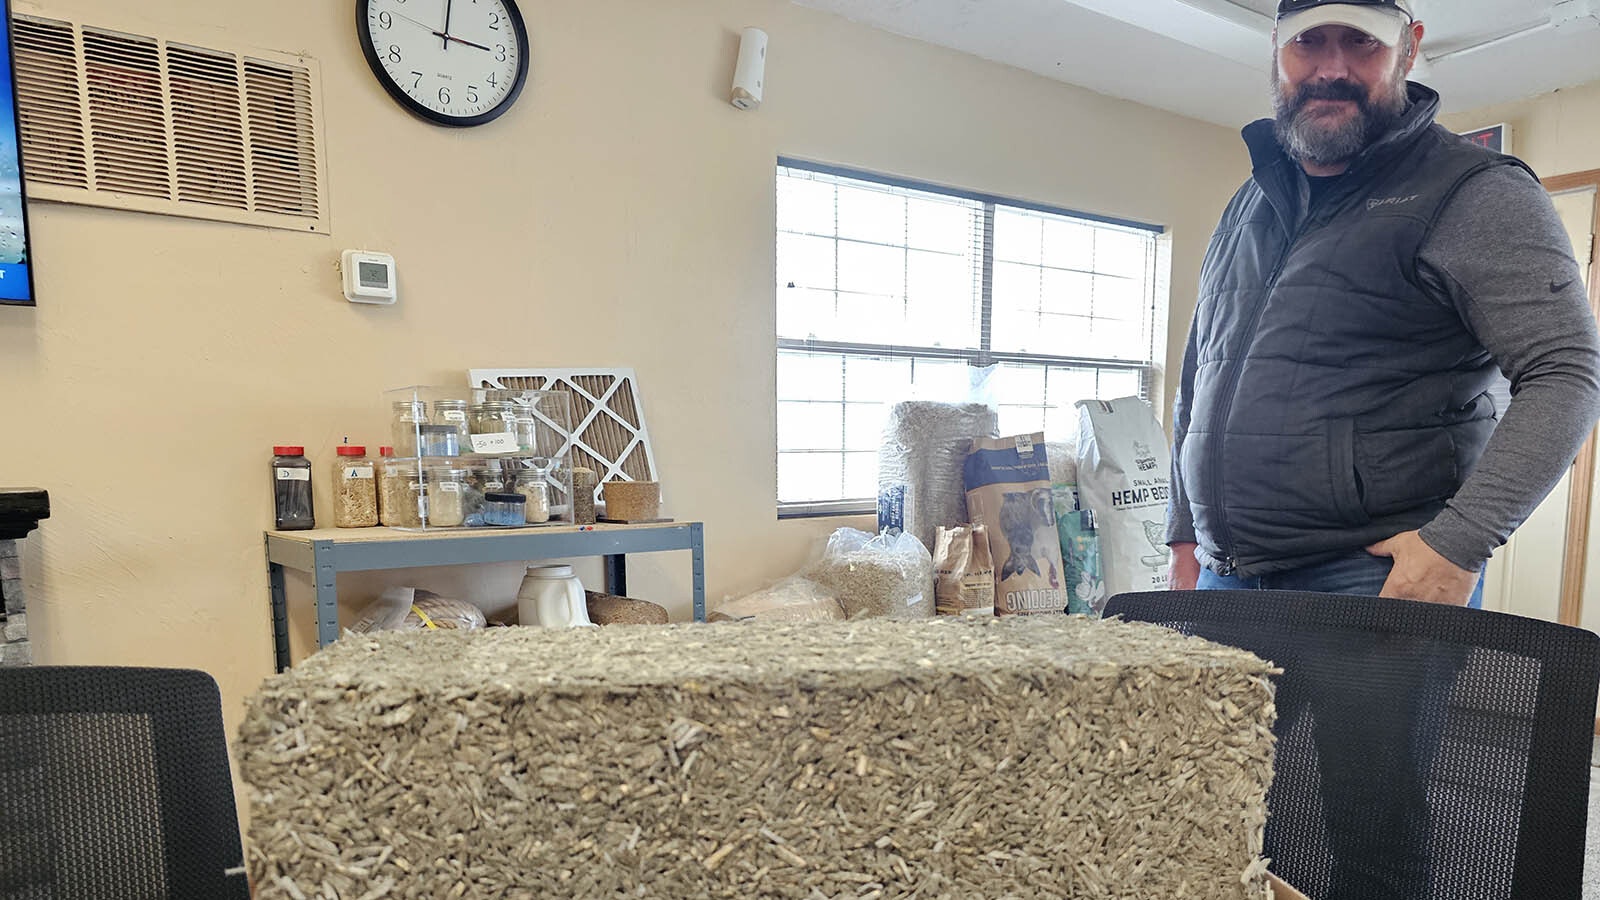 A block of hempcrete with Justin Loeffler behind. Hempcrete is extremely hard and is a concrete substitute made of hemp.